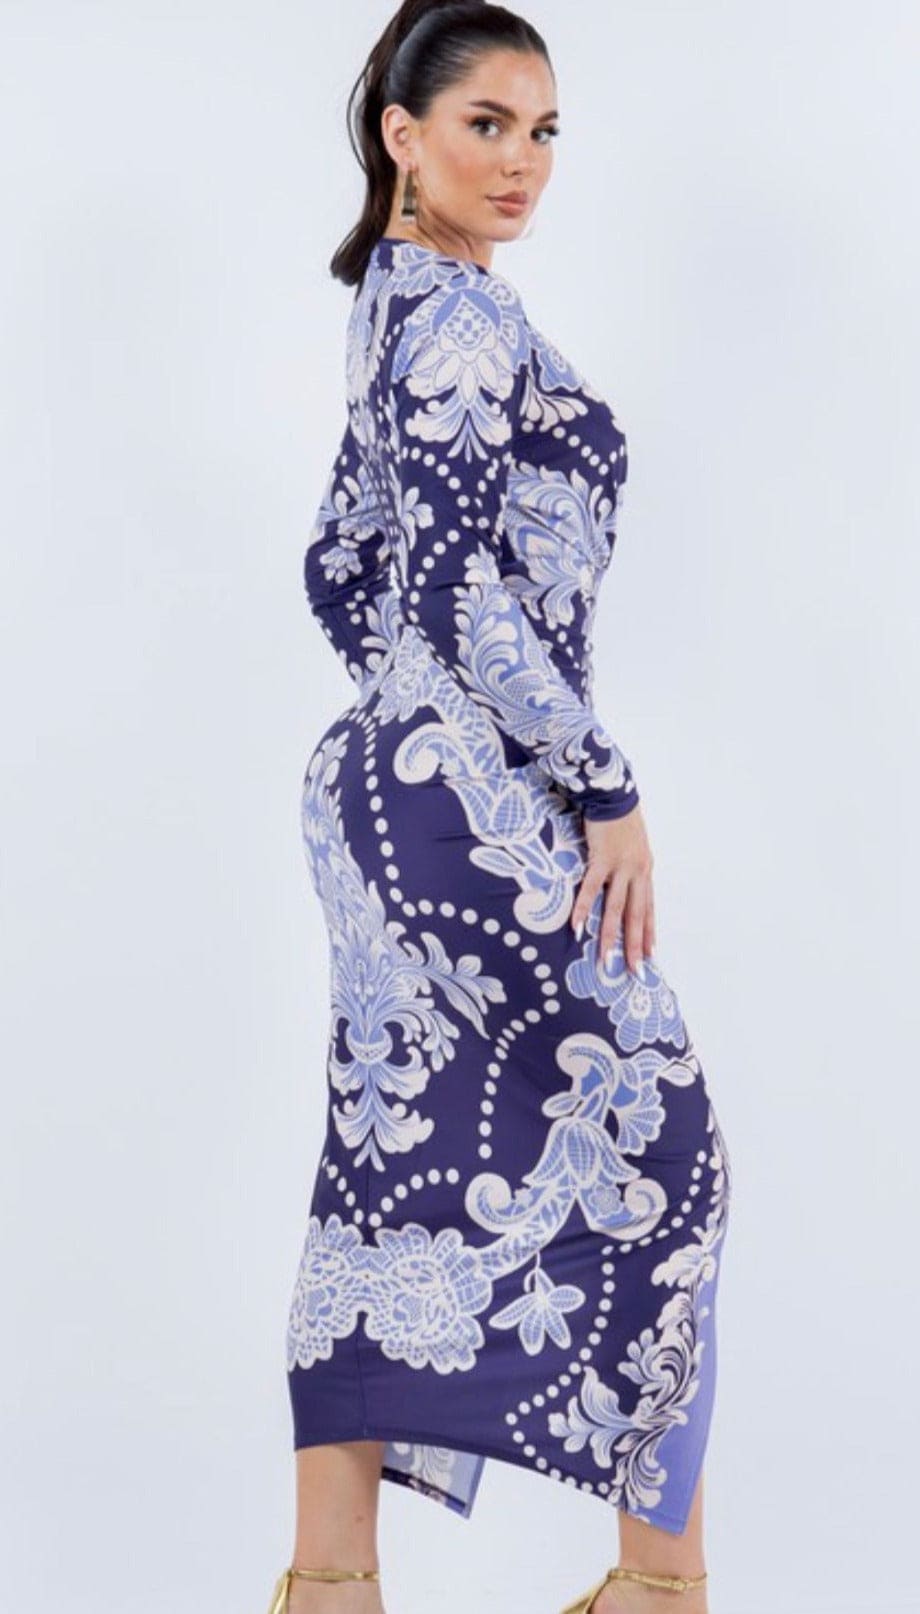 The "Mystic Orchid" Ruched Printed Dress